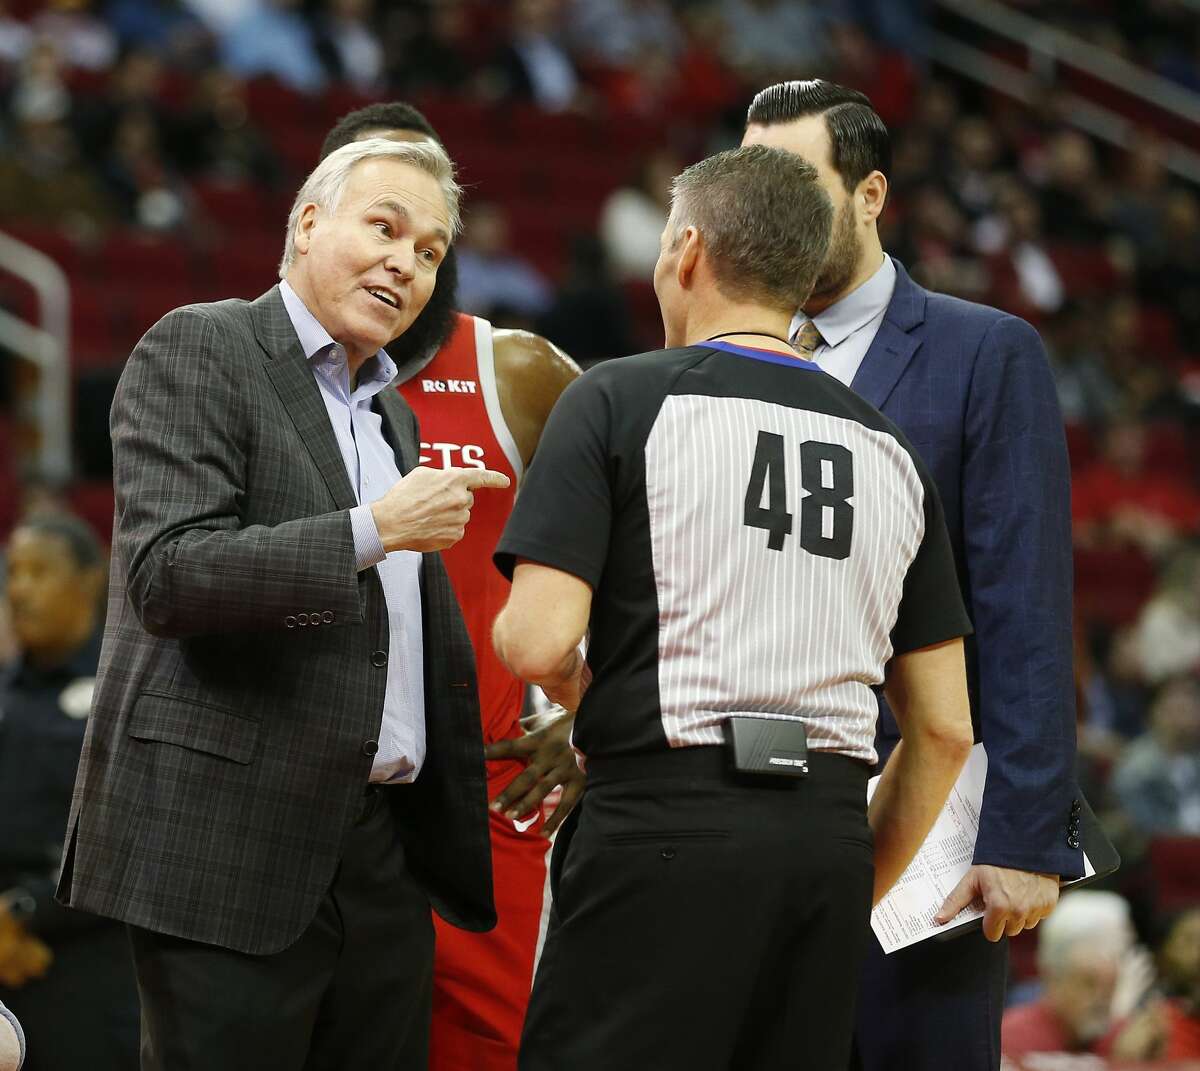 Houston Rockets head coach Mike D'Antoni argues a call with official Scott Foster during the first half of an NBA game at Toyota Center, Wednesday, Dec. 19, 2018, in Houston.